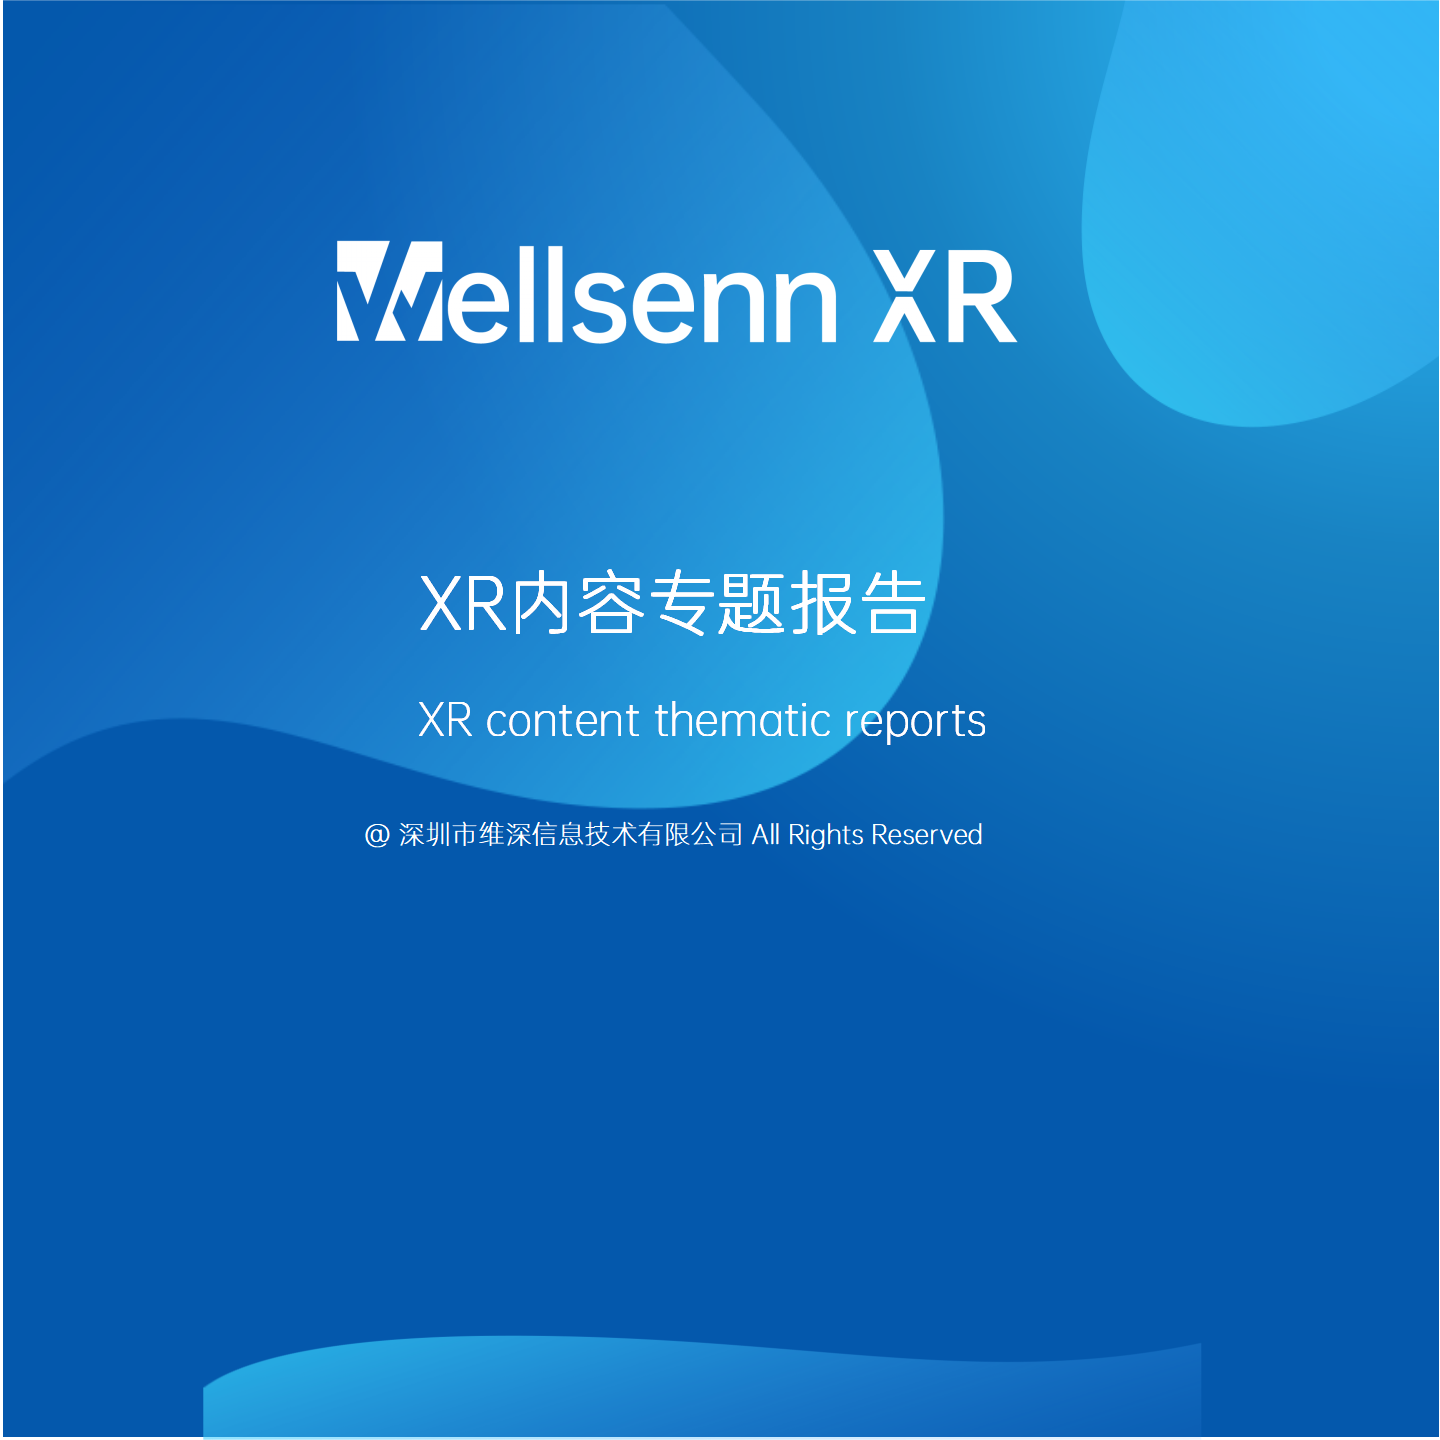 XR thematic reports are based on hardware or software content research related to XR and are presented in the form of reports analyzed by analysts